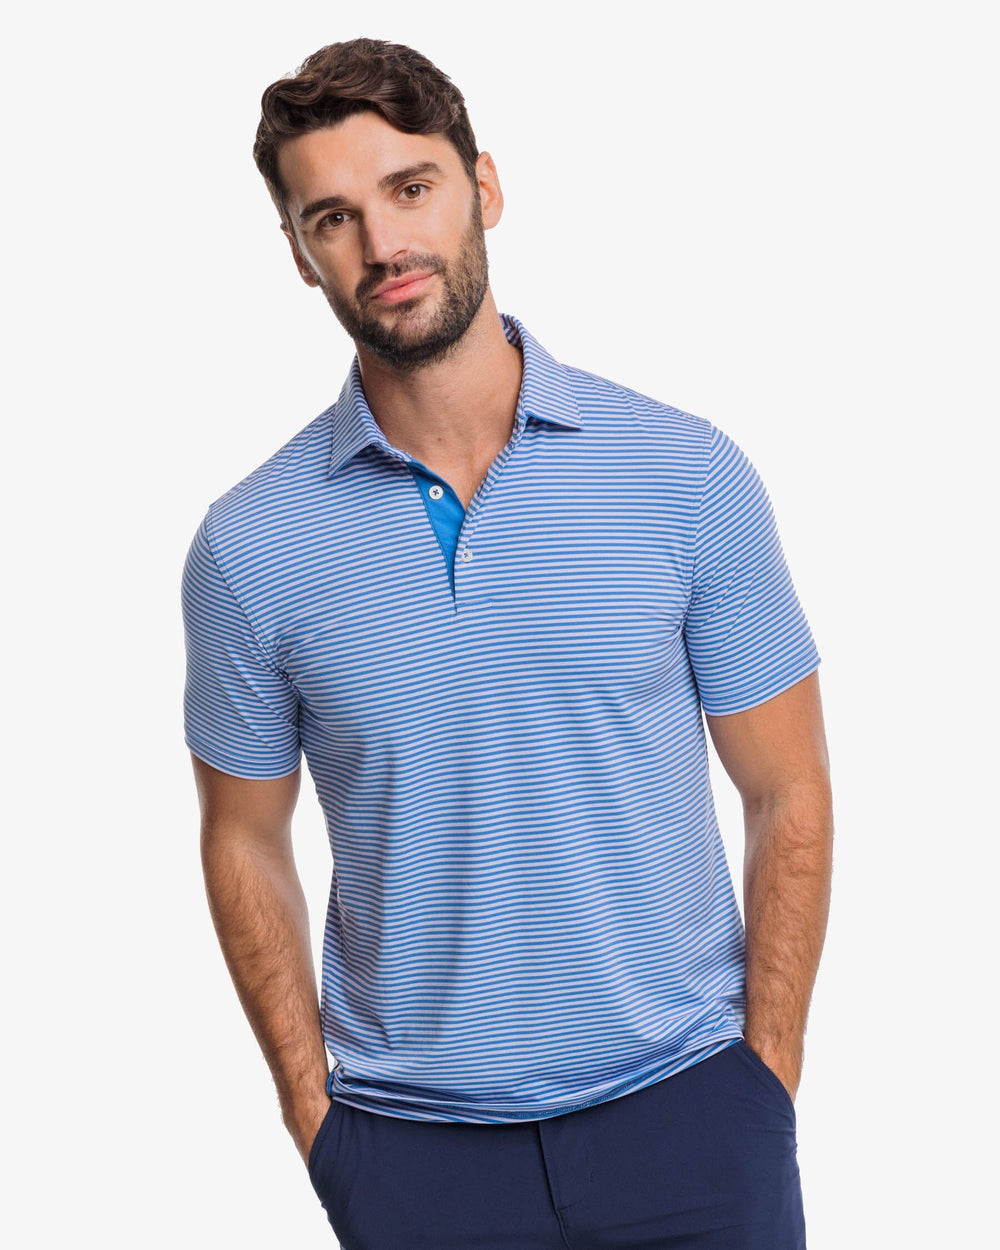 The front view of the Southern Tide Shores Stripe brrr eeze Performance Polo Shirt by Southern Tide - Light Purple